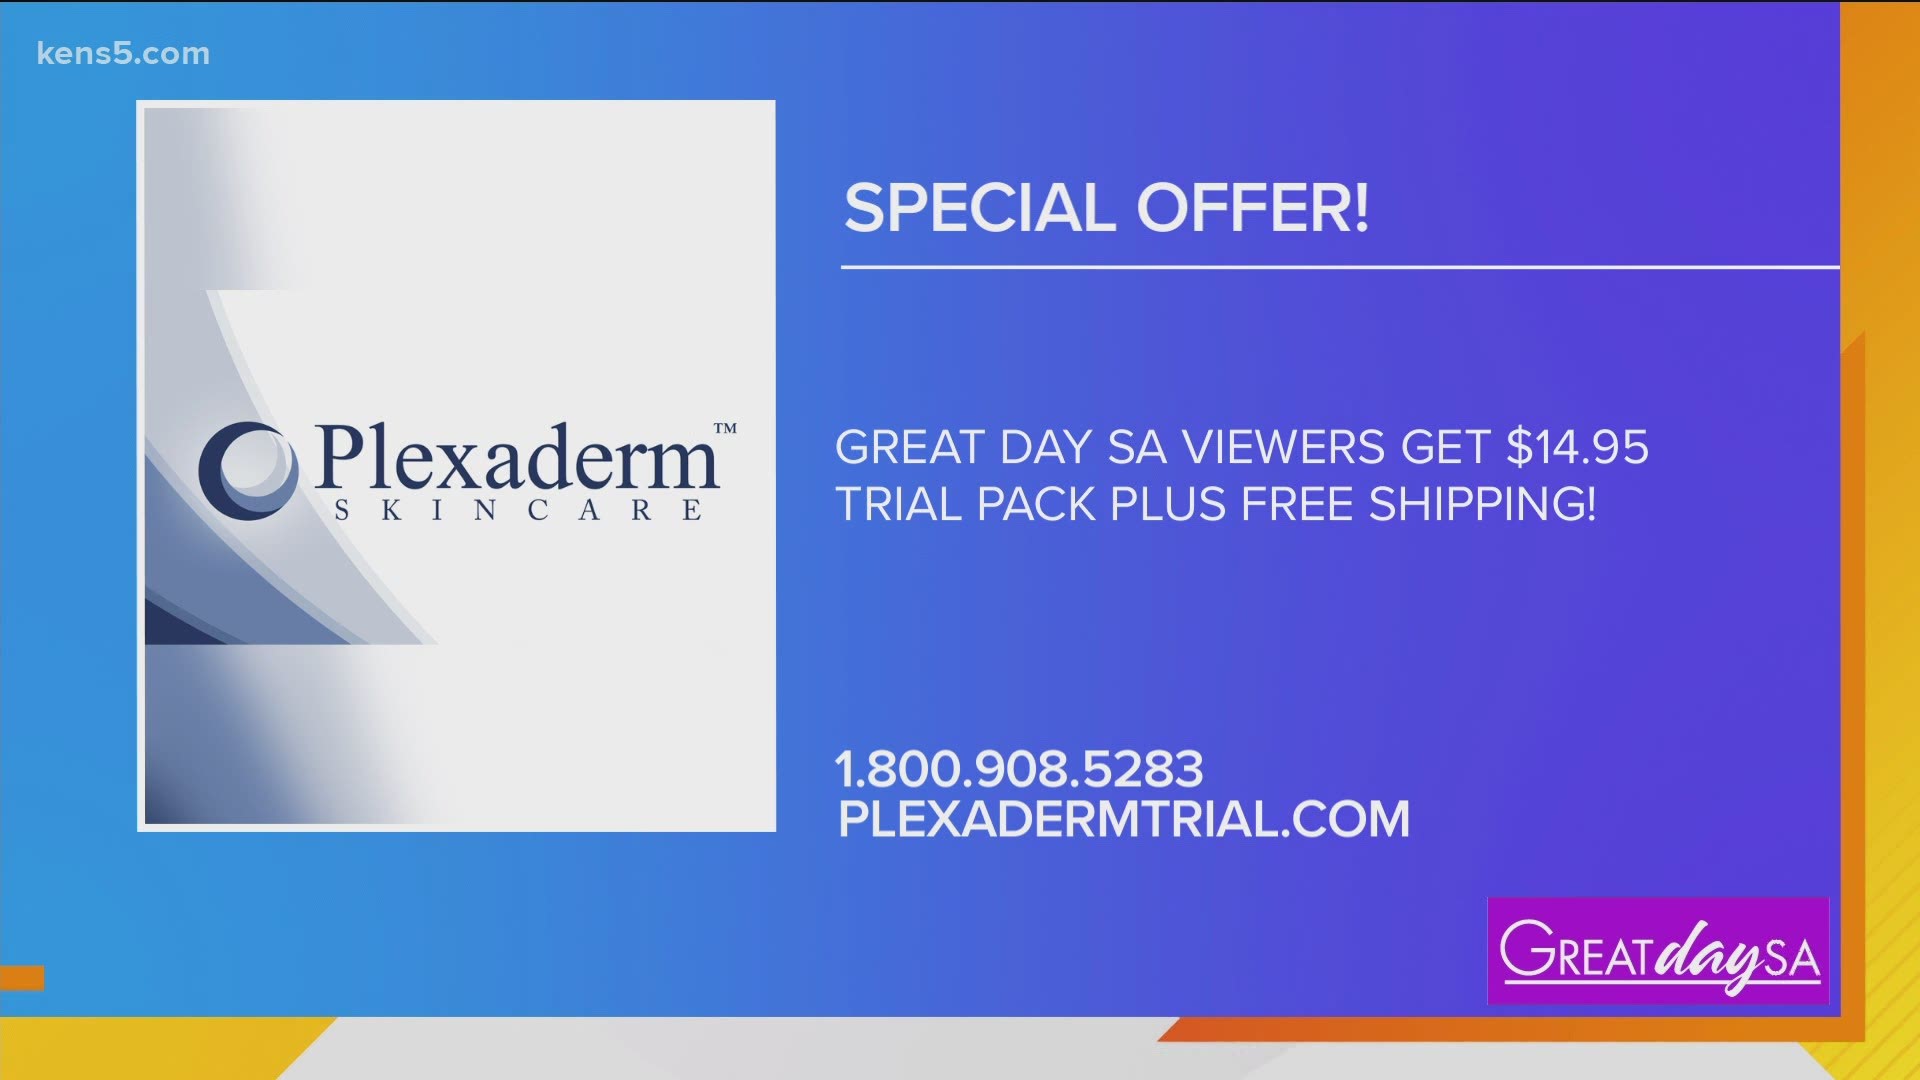 Plexaderm is offering a $14.95 trial pack of their non-invasive anti-aging serum. Visit their website to learn more.